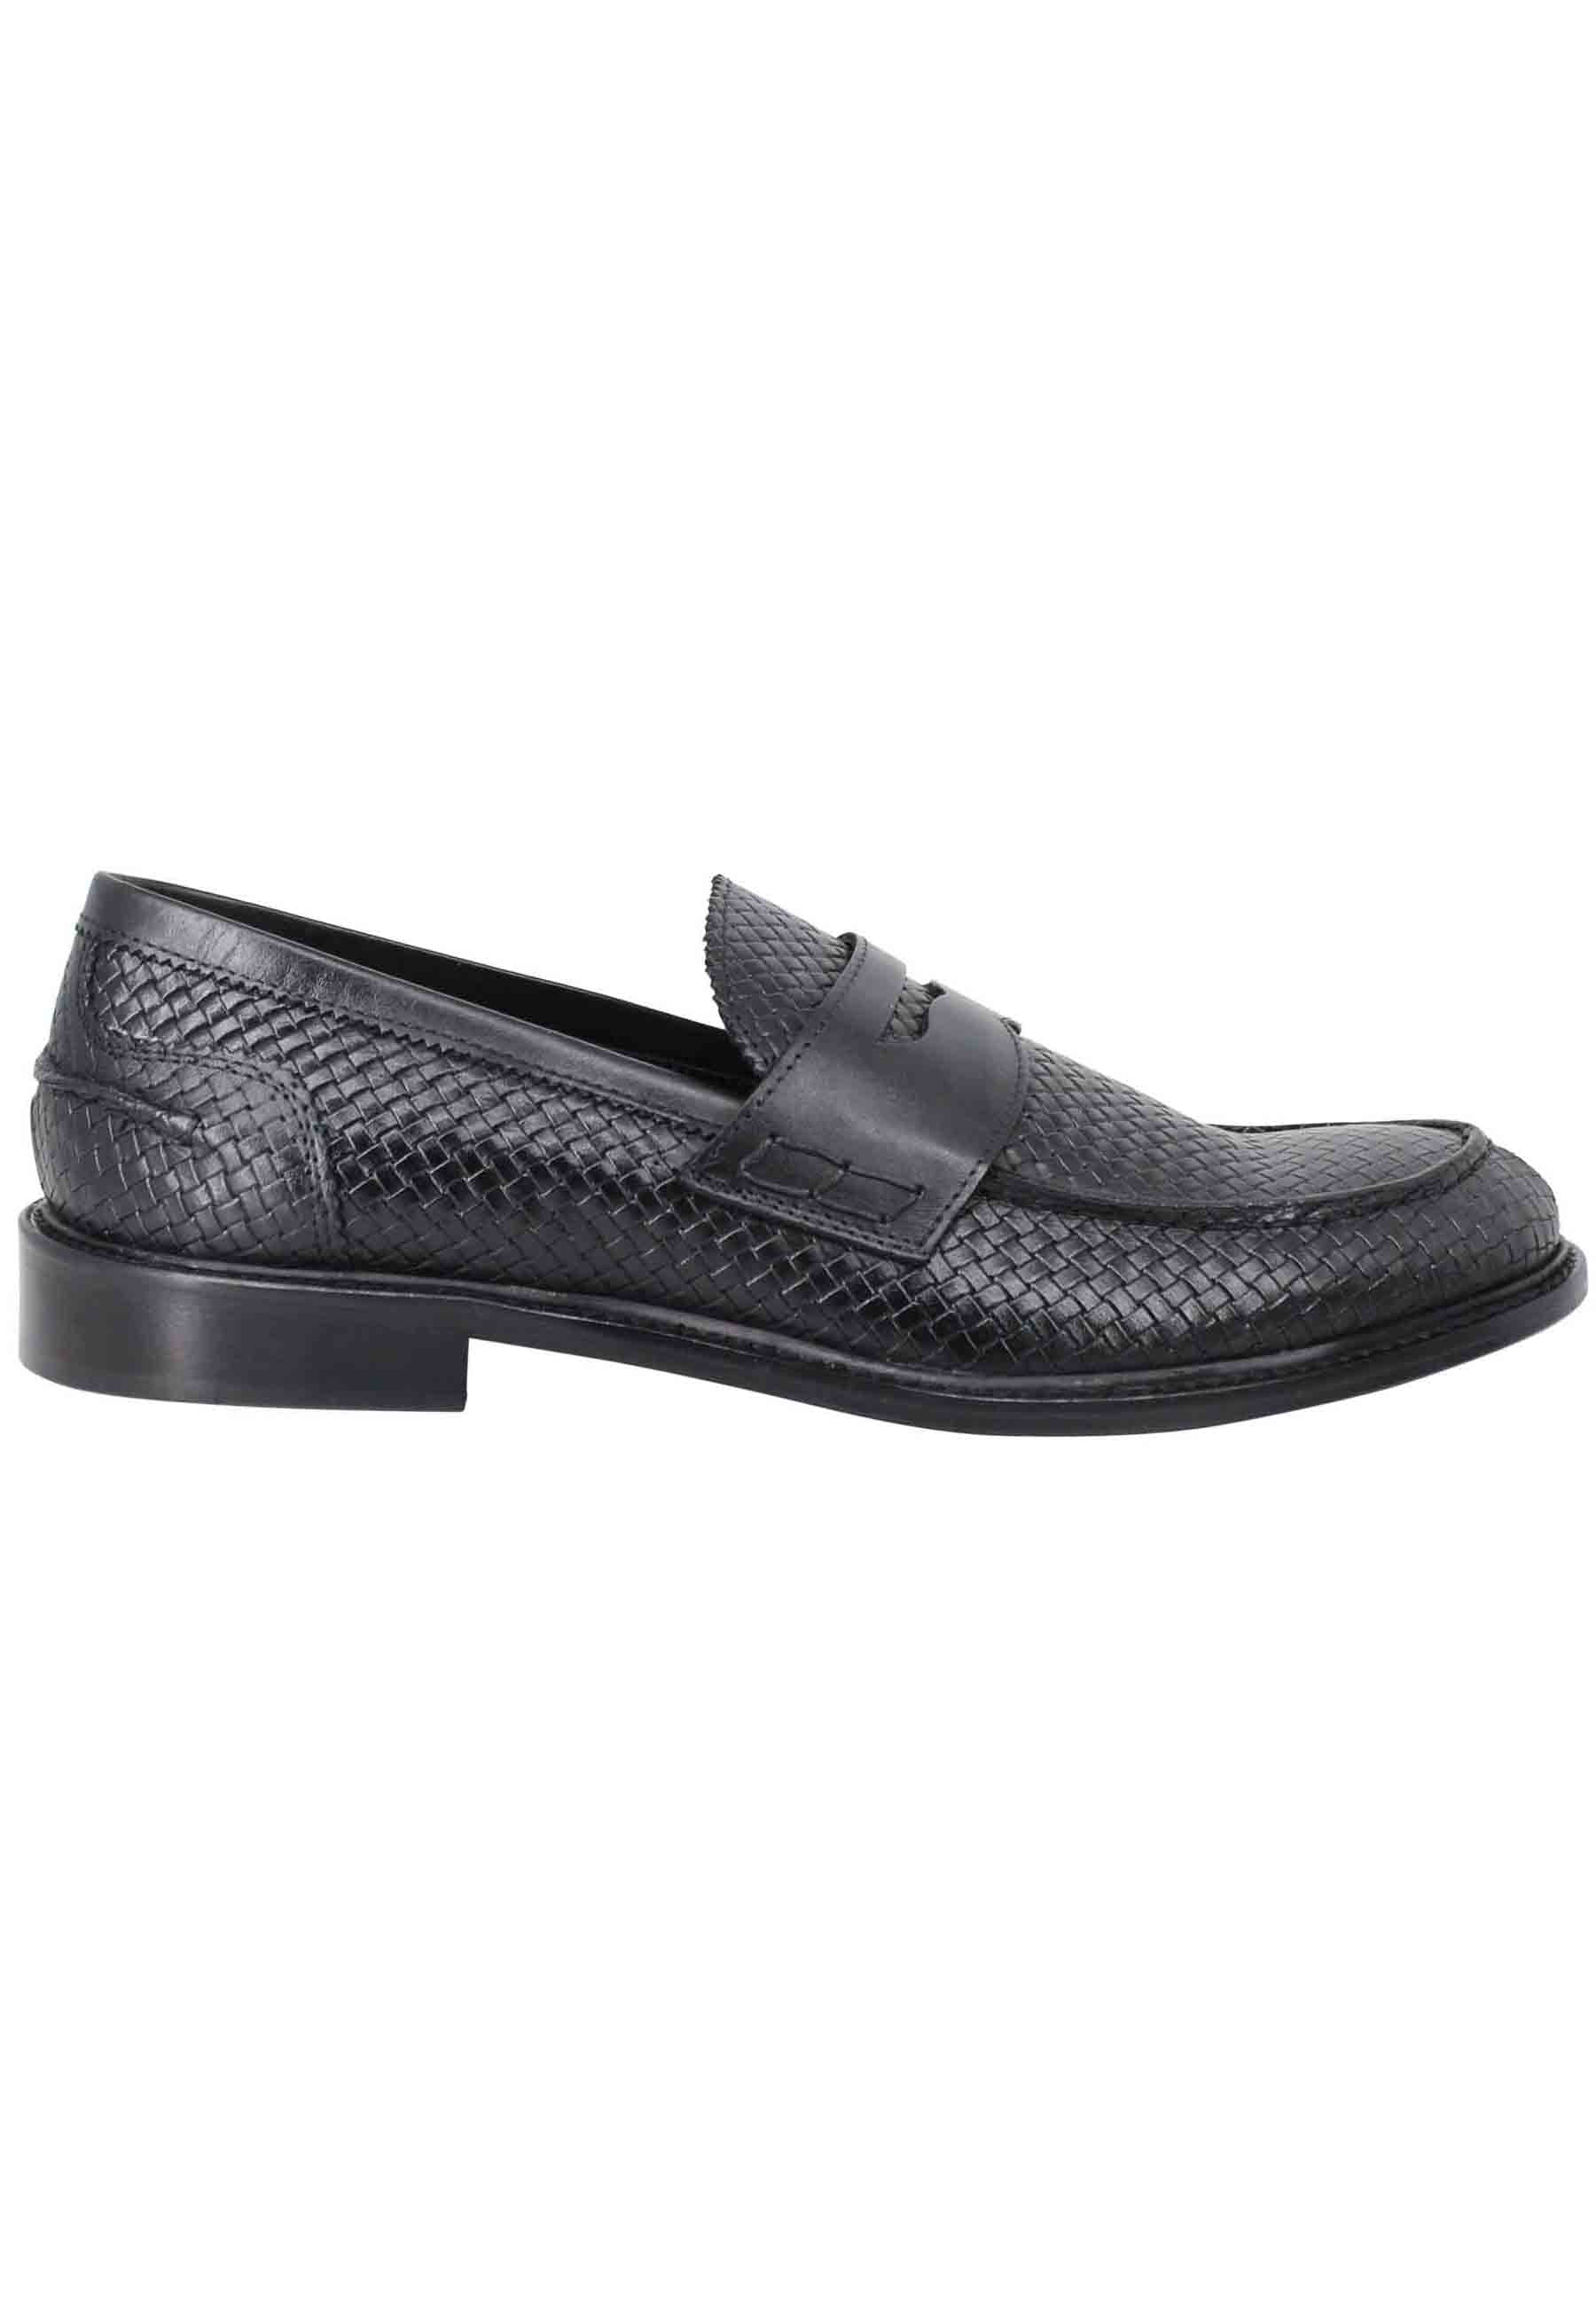 Men's loafers in black woven leather with stitched leather sole